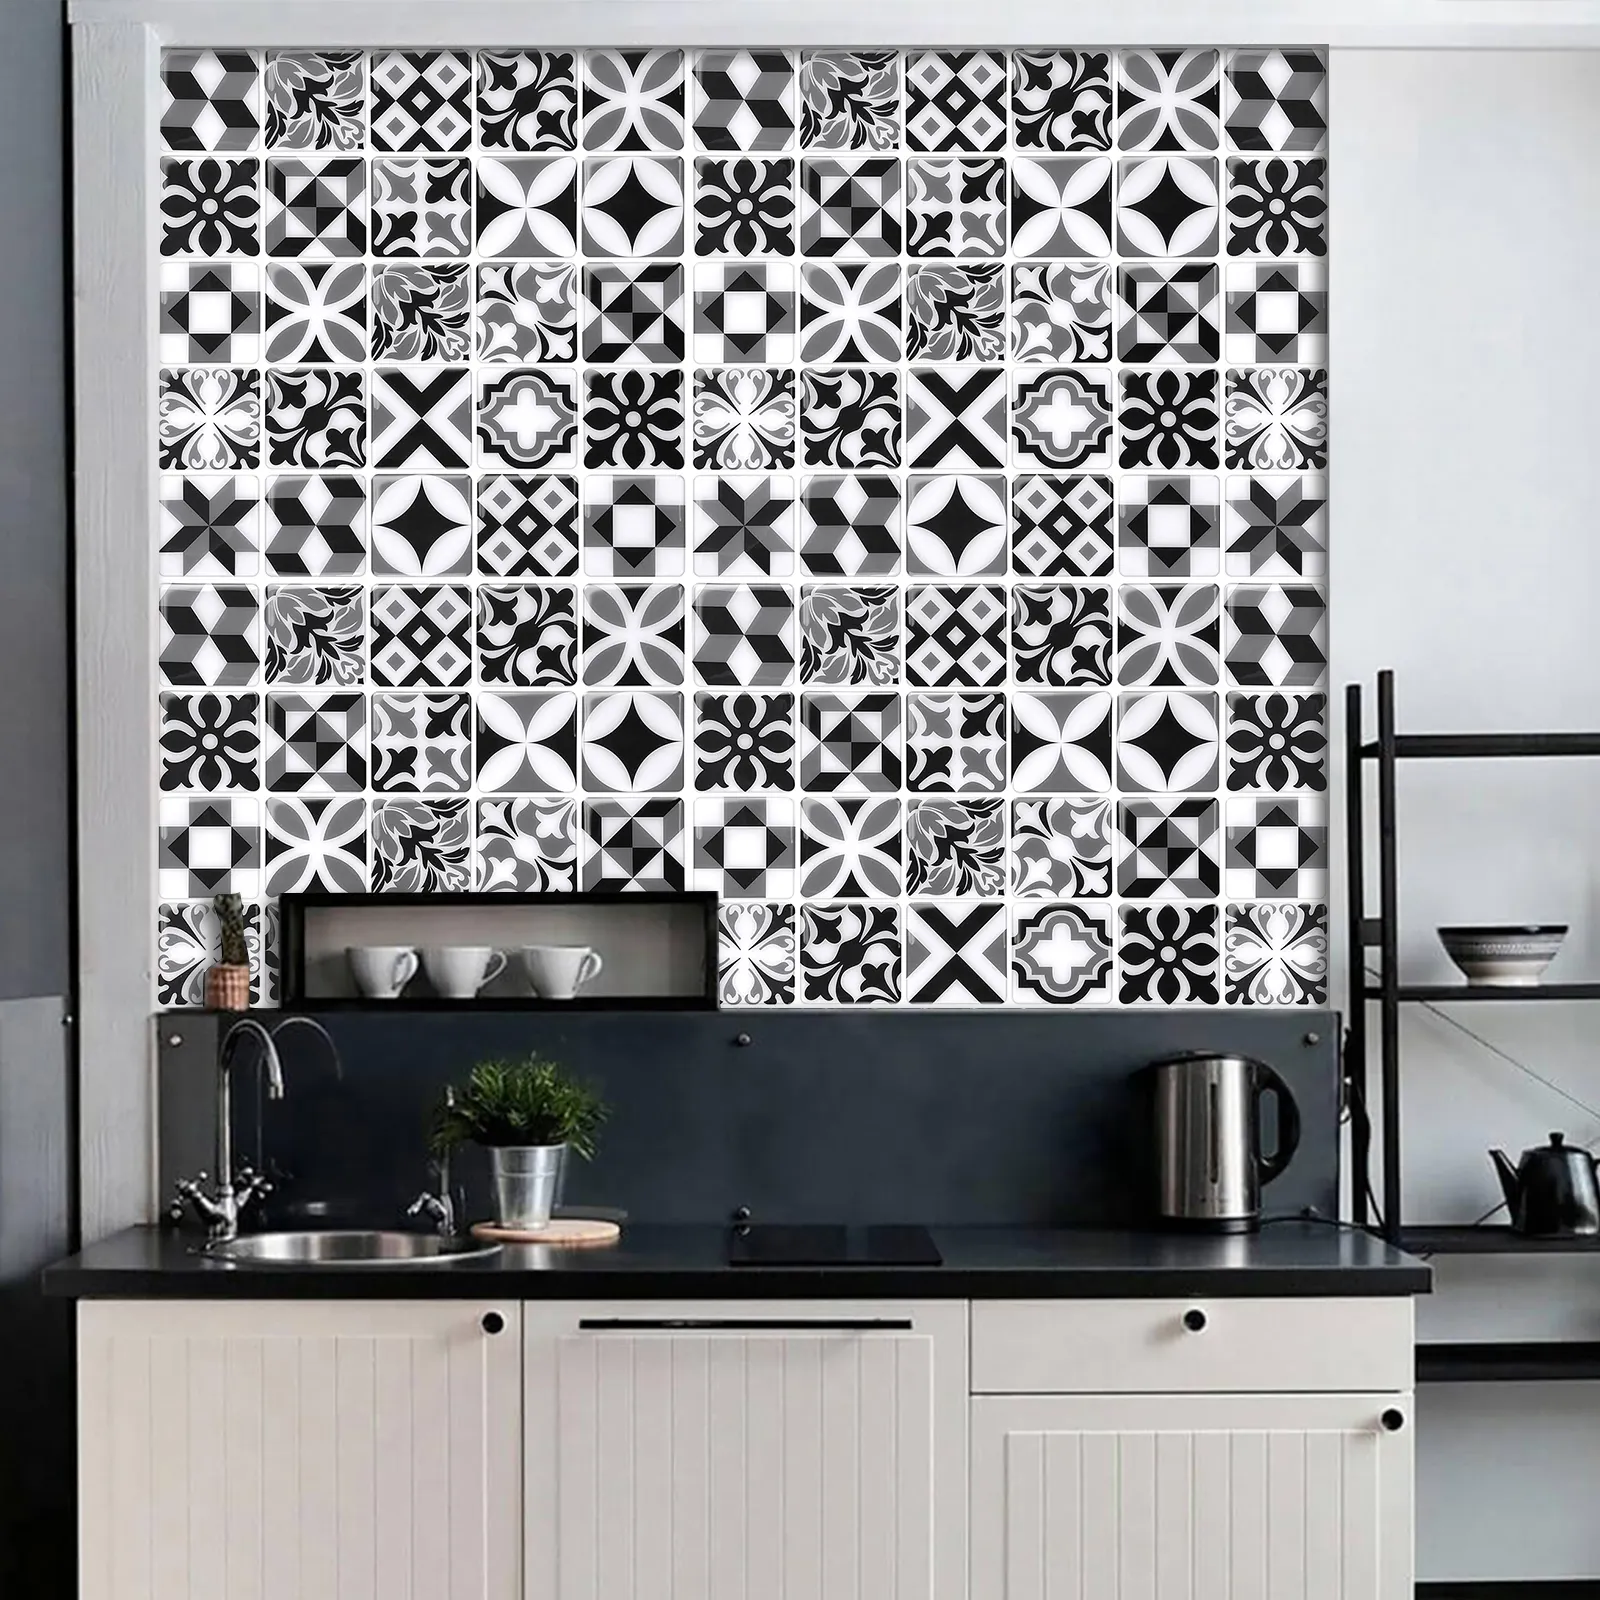 New Peel and Stick Bathroom Moroccan Design Black and White Wall Tiles